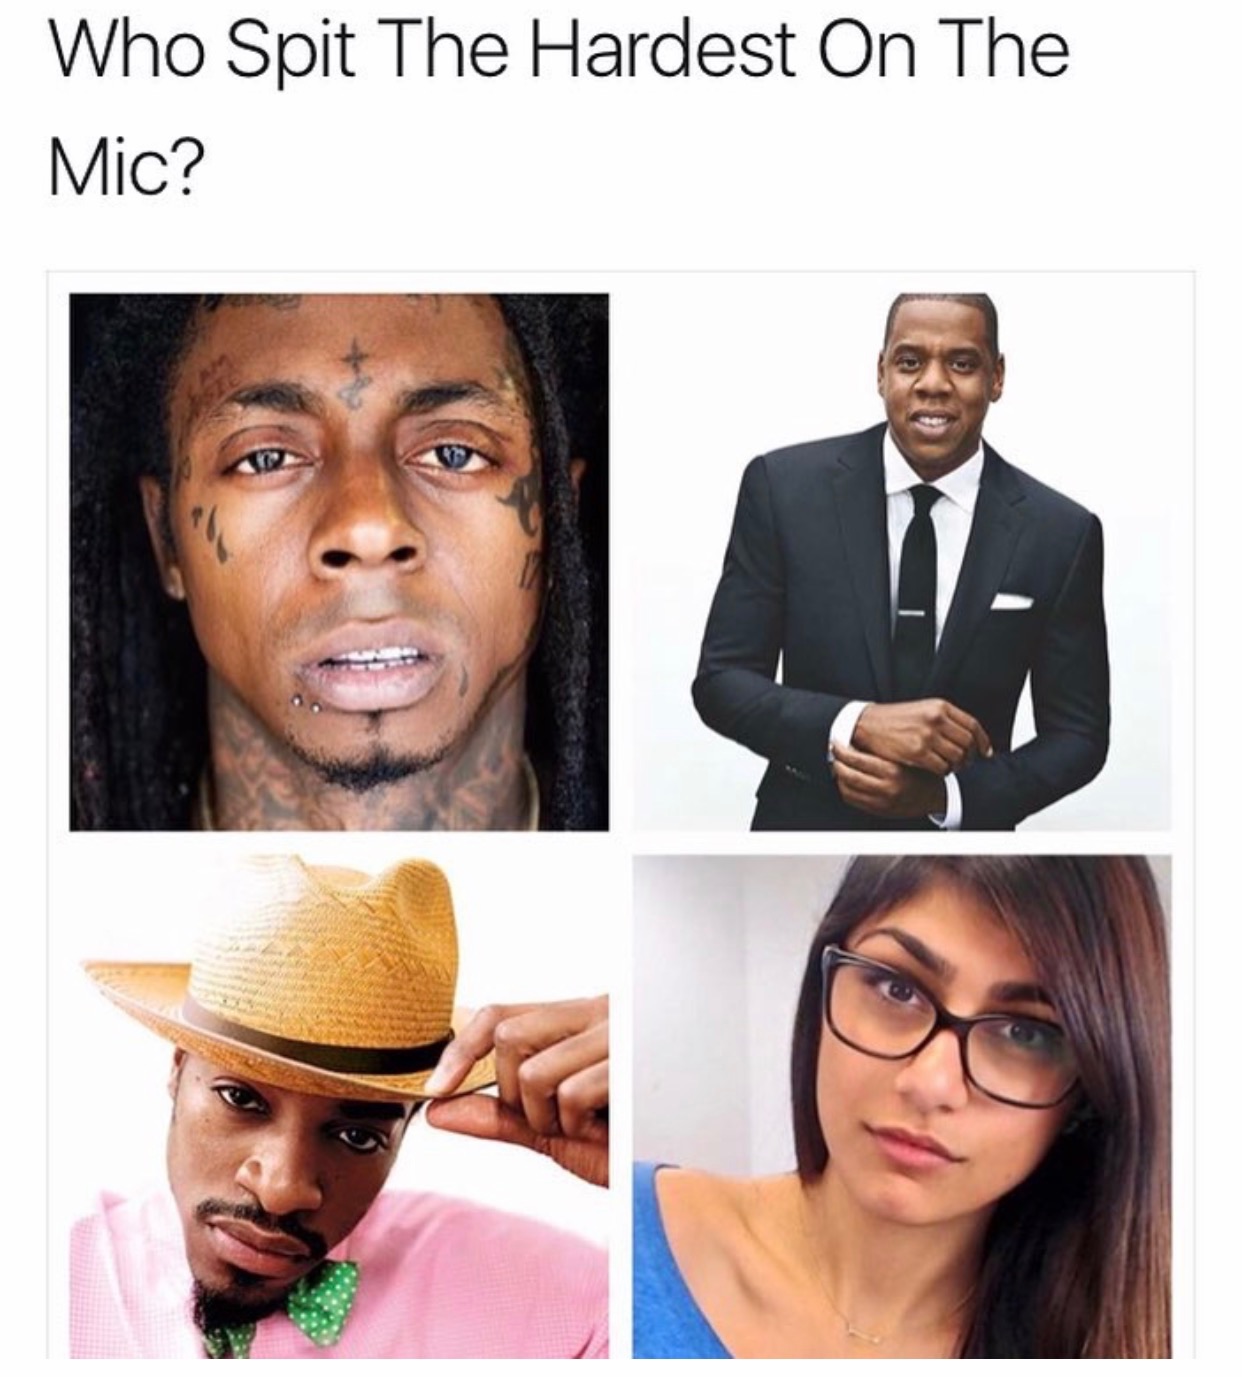 memes - spits the hardest on the mic - Who Spit The Hardest On The Mic?